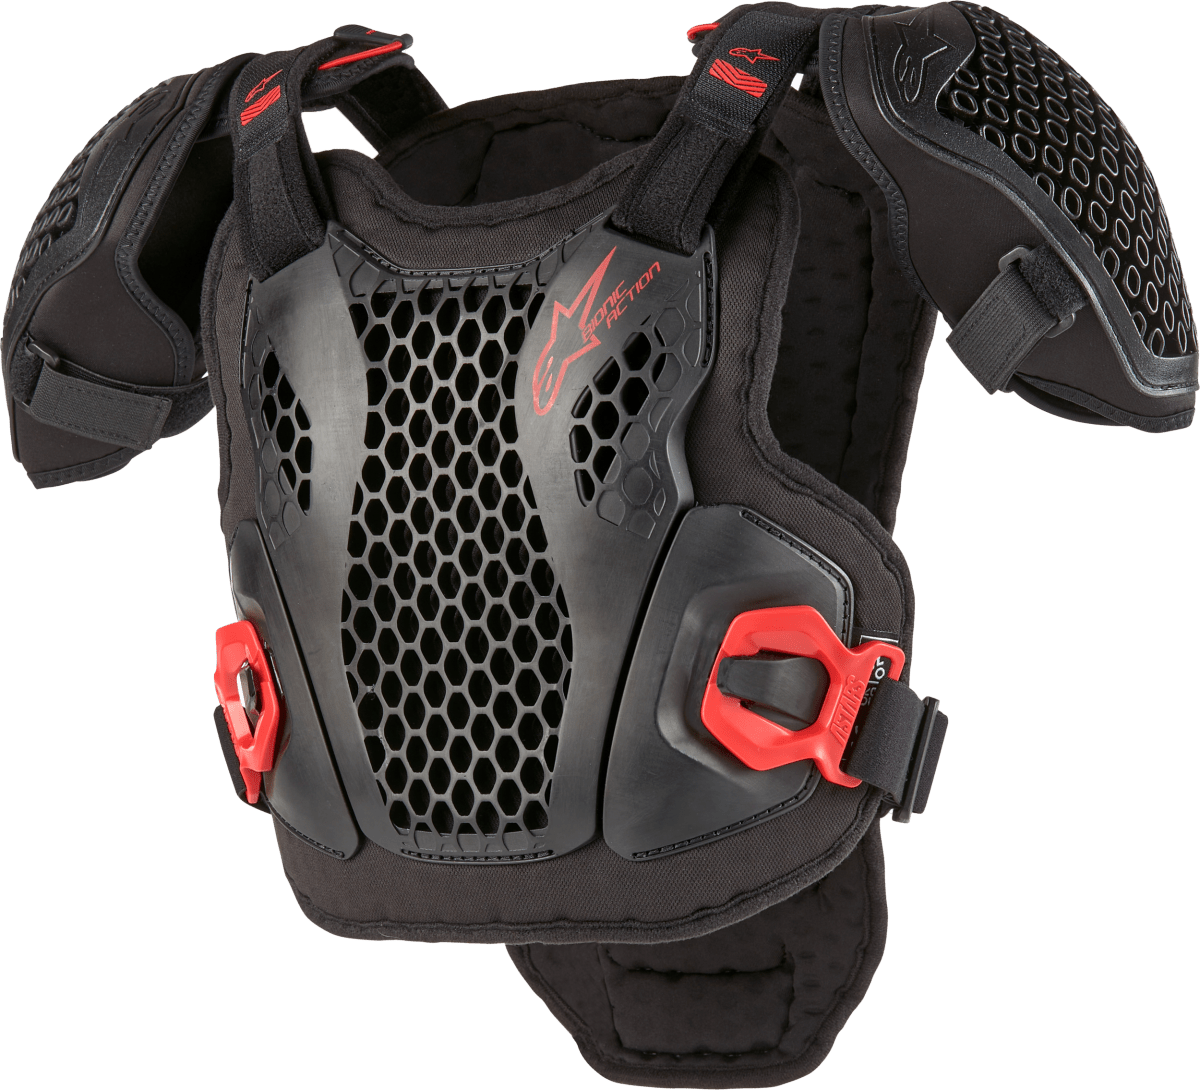 ALPINESTARS - BIONIC ACTION YOUTH CHEST PROTECTOR - 482-6453L - 8059347200767